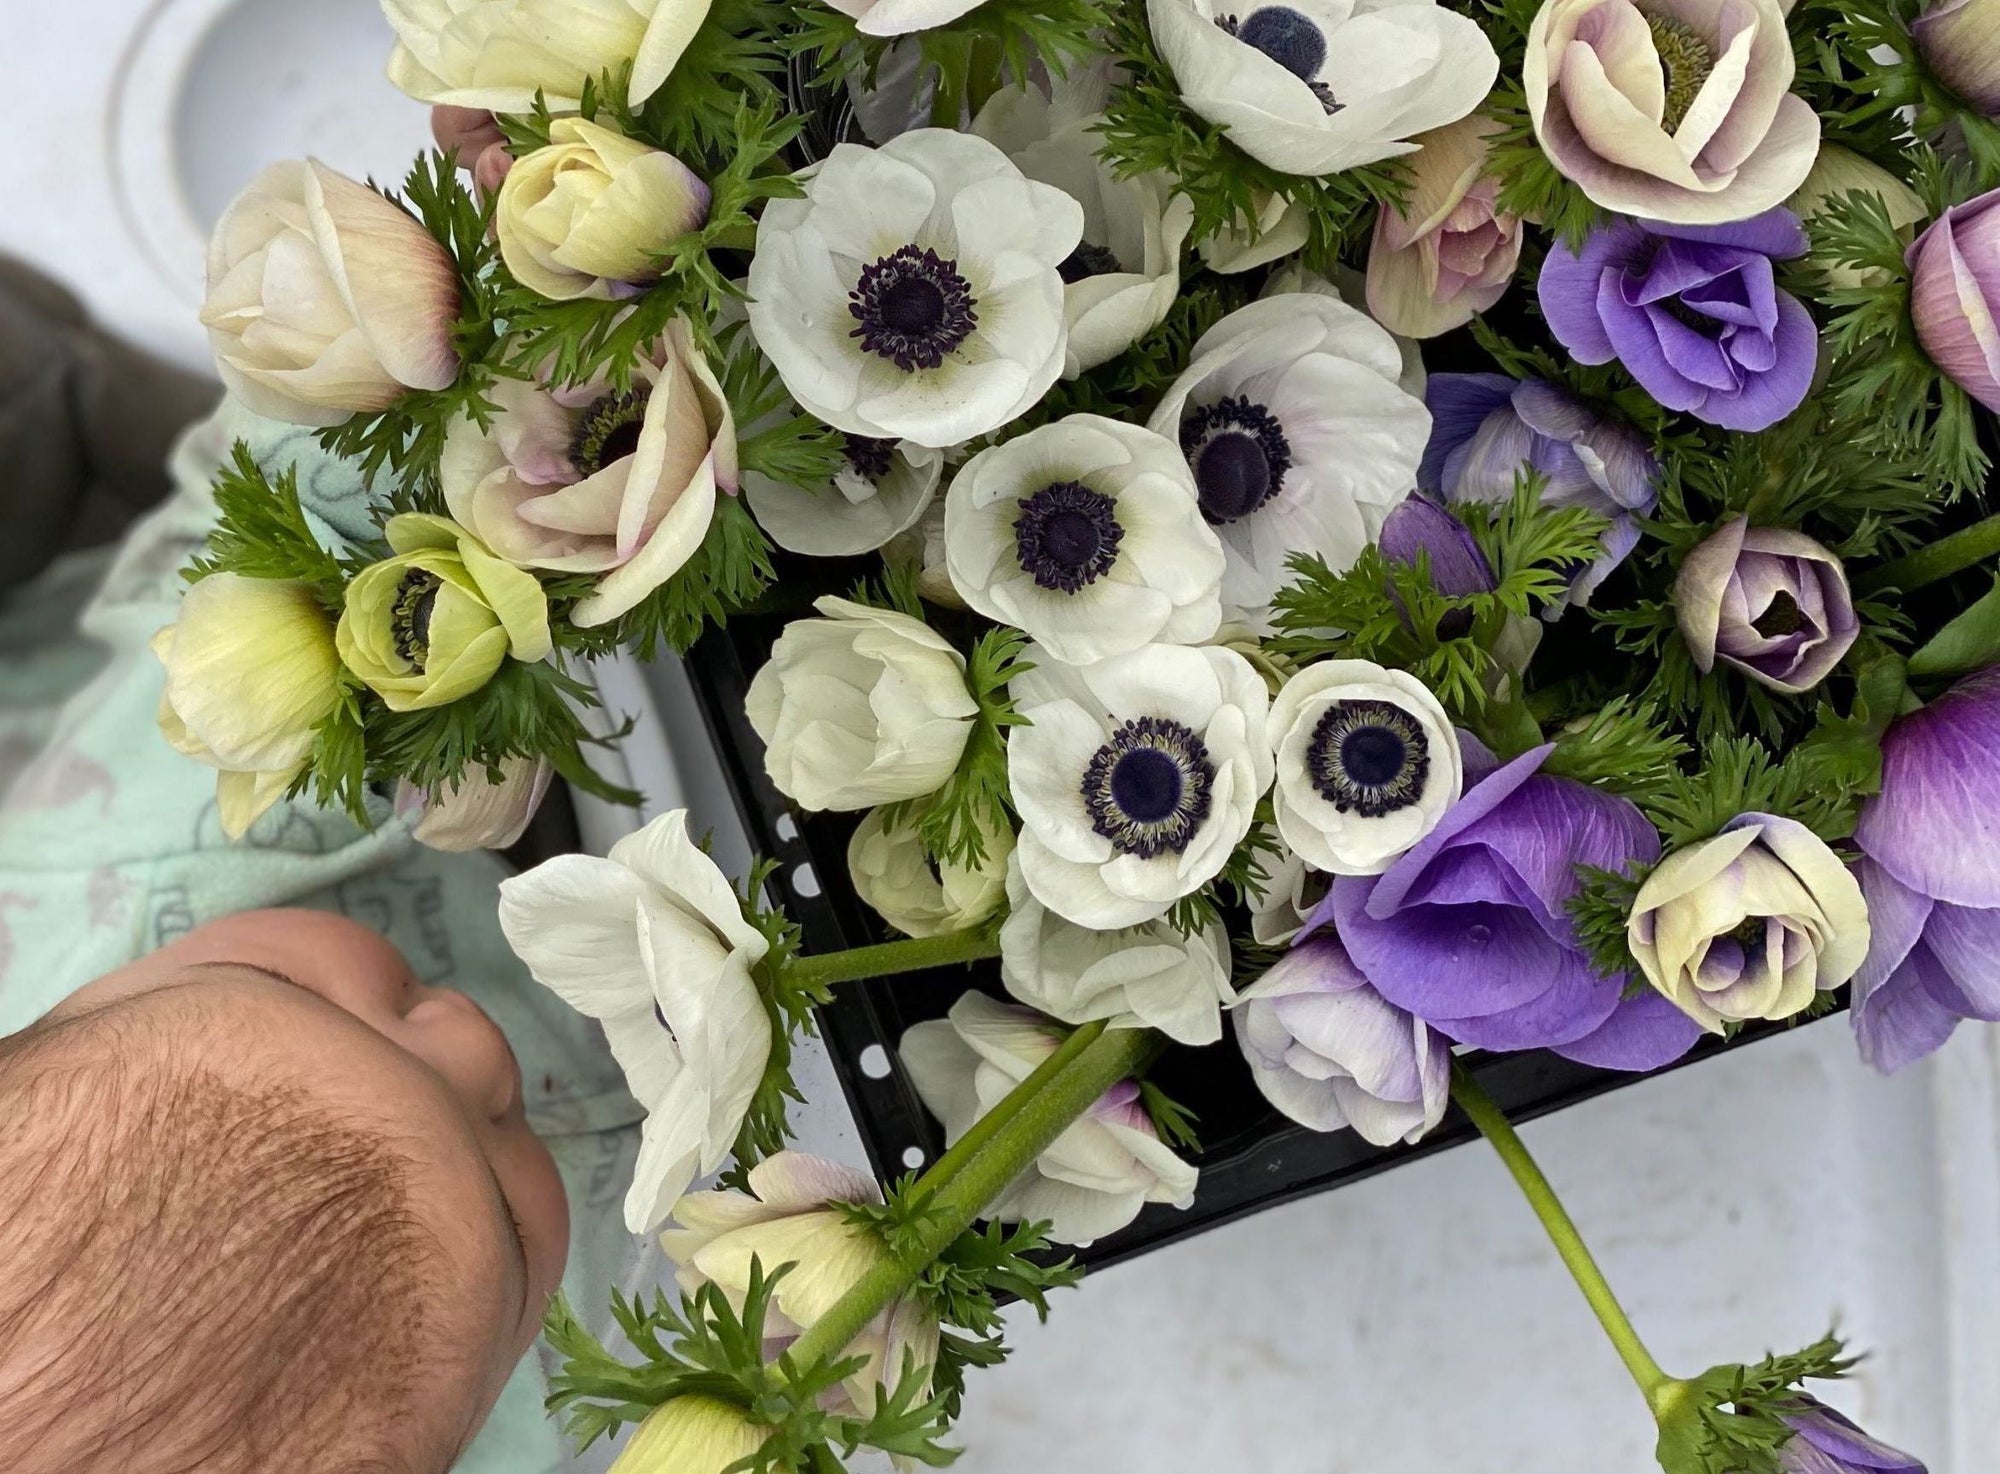 Vibrant anemone flowers with silky petals and dark centers, arranged in a lush bouquet.